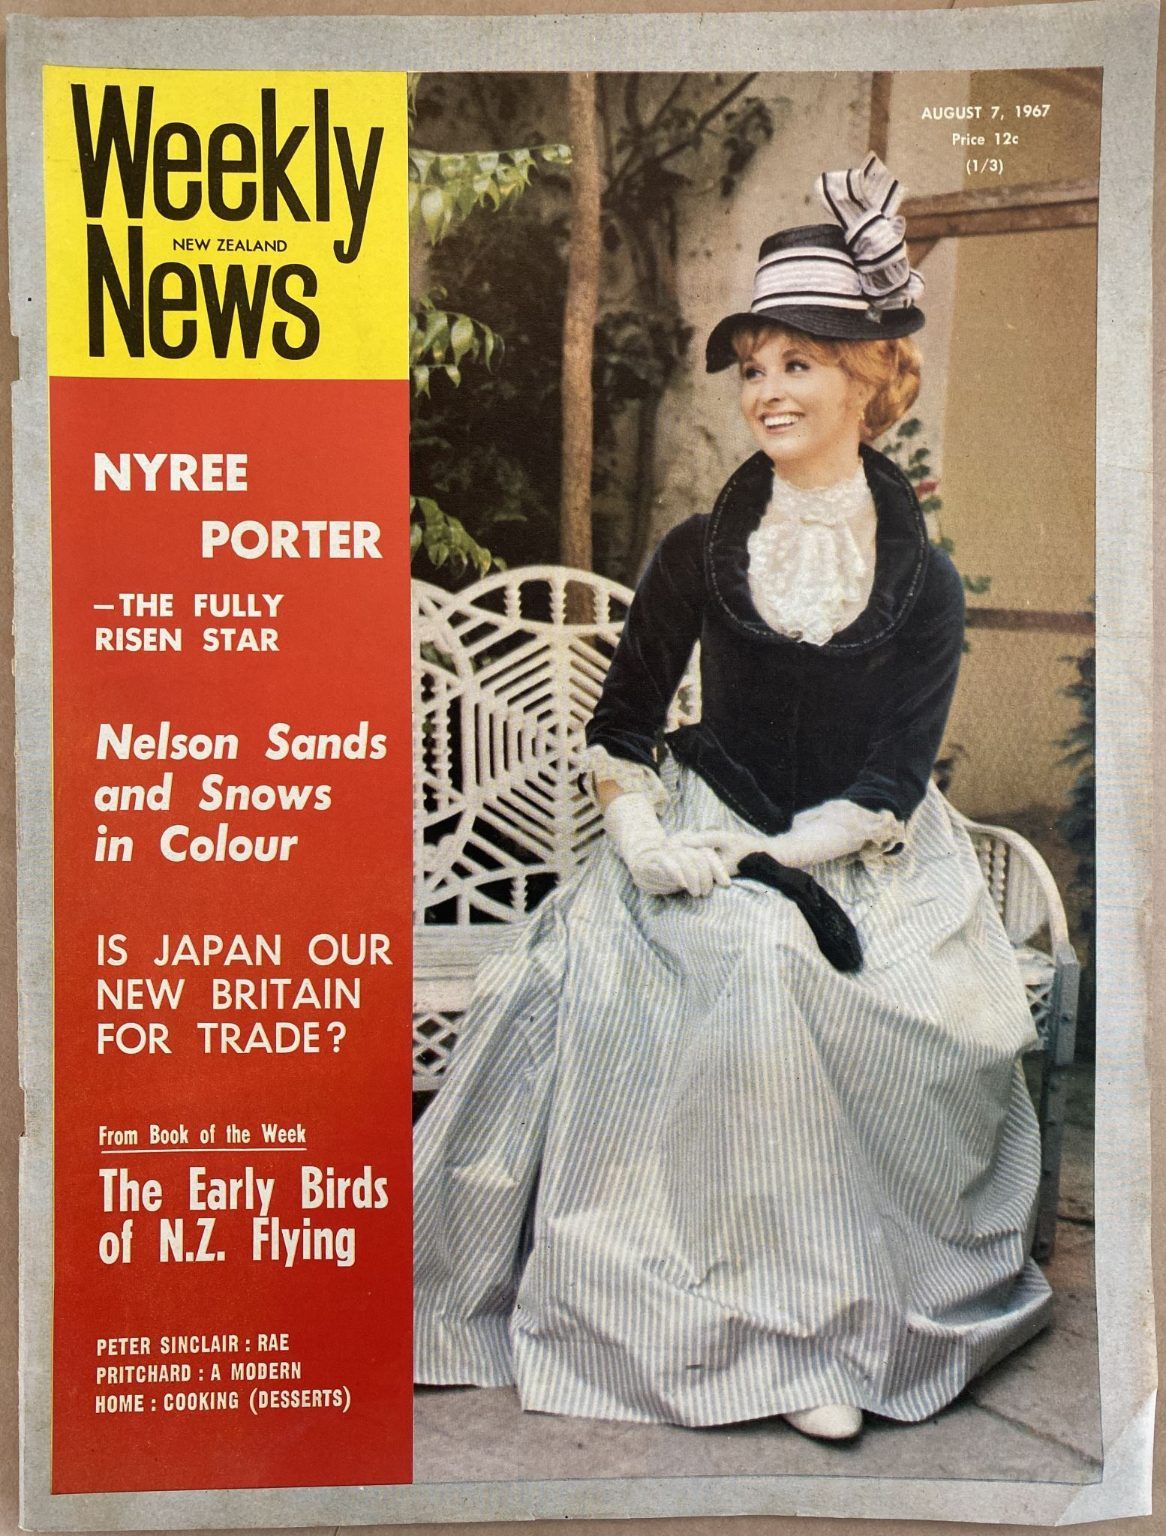 OLD NEWSPAPER: New Zealand Weekly News, No. 5410, 7 August 1967